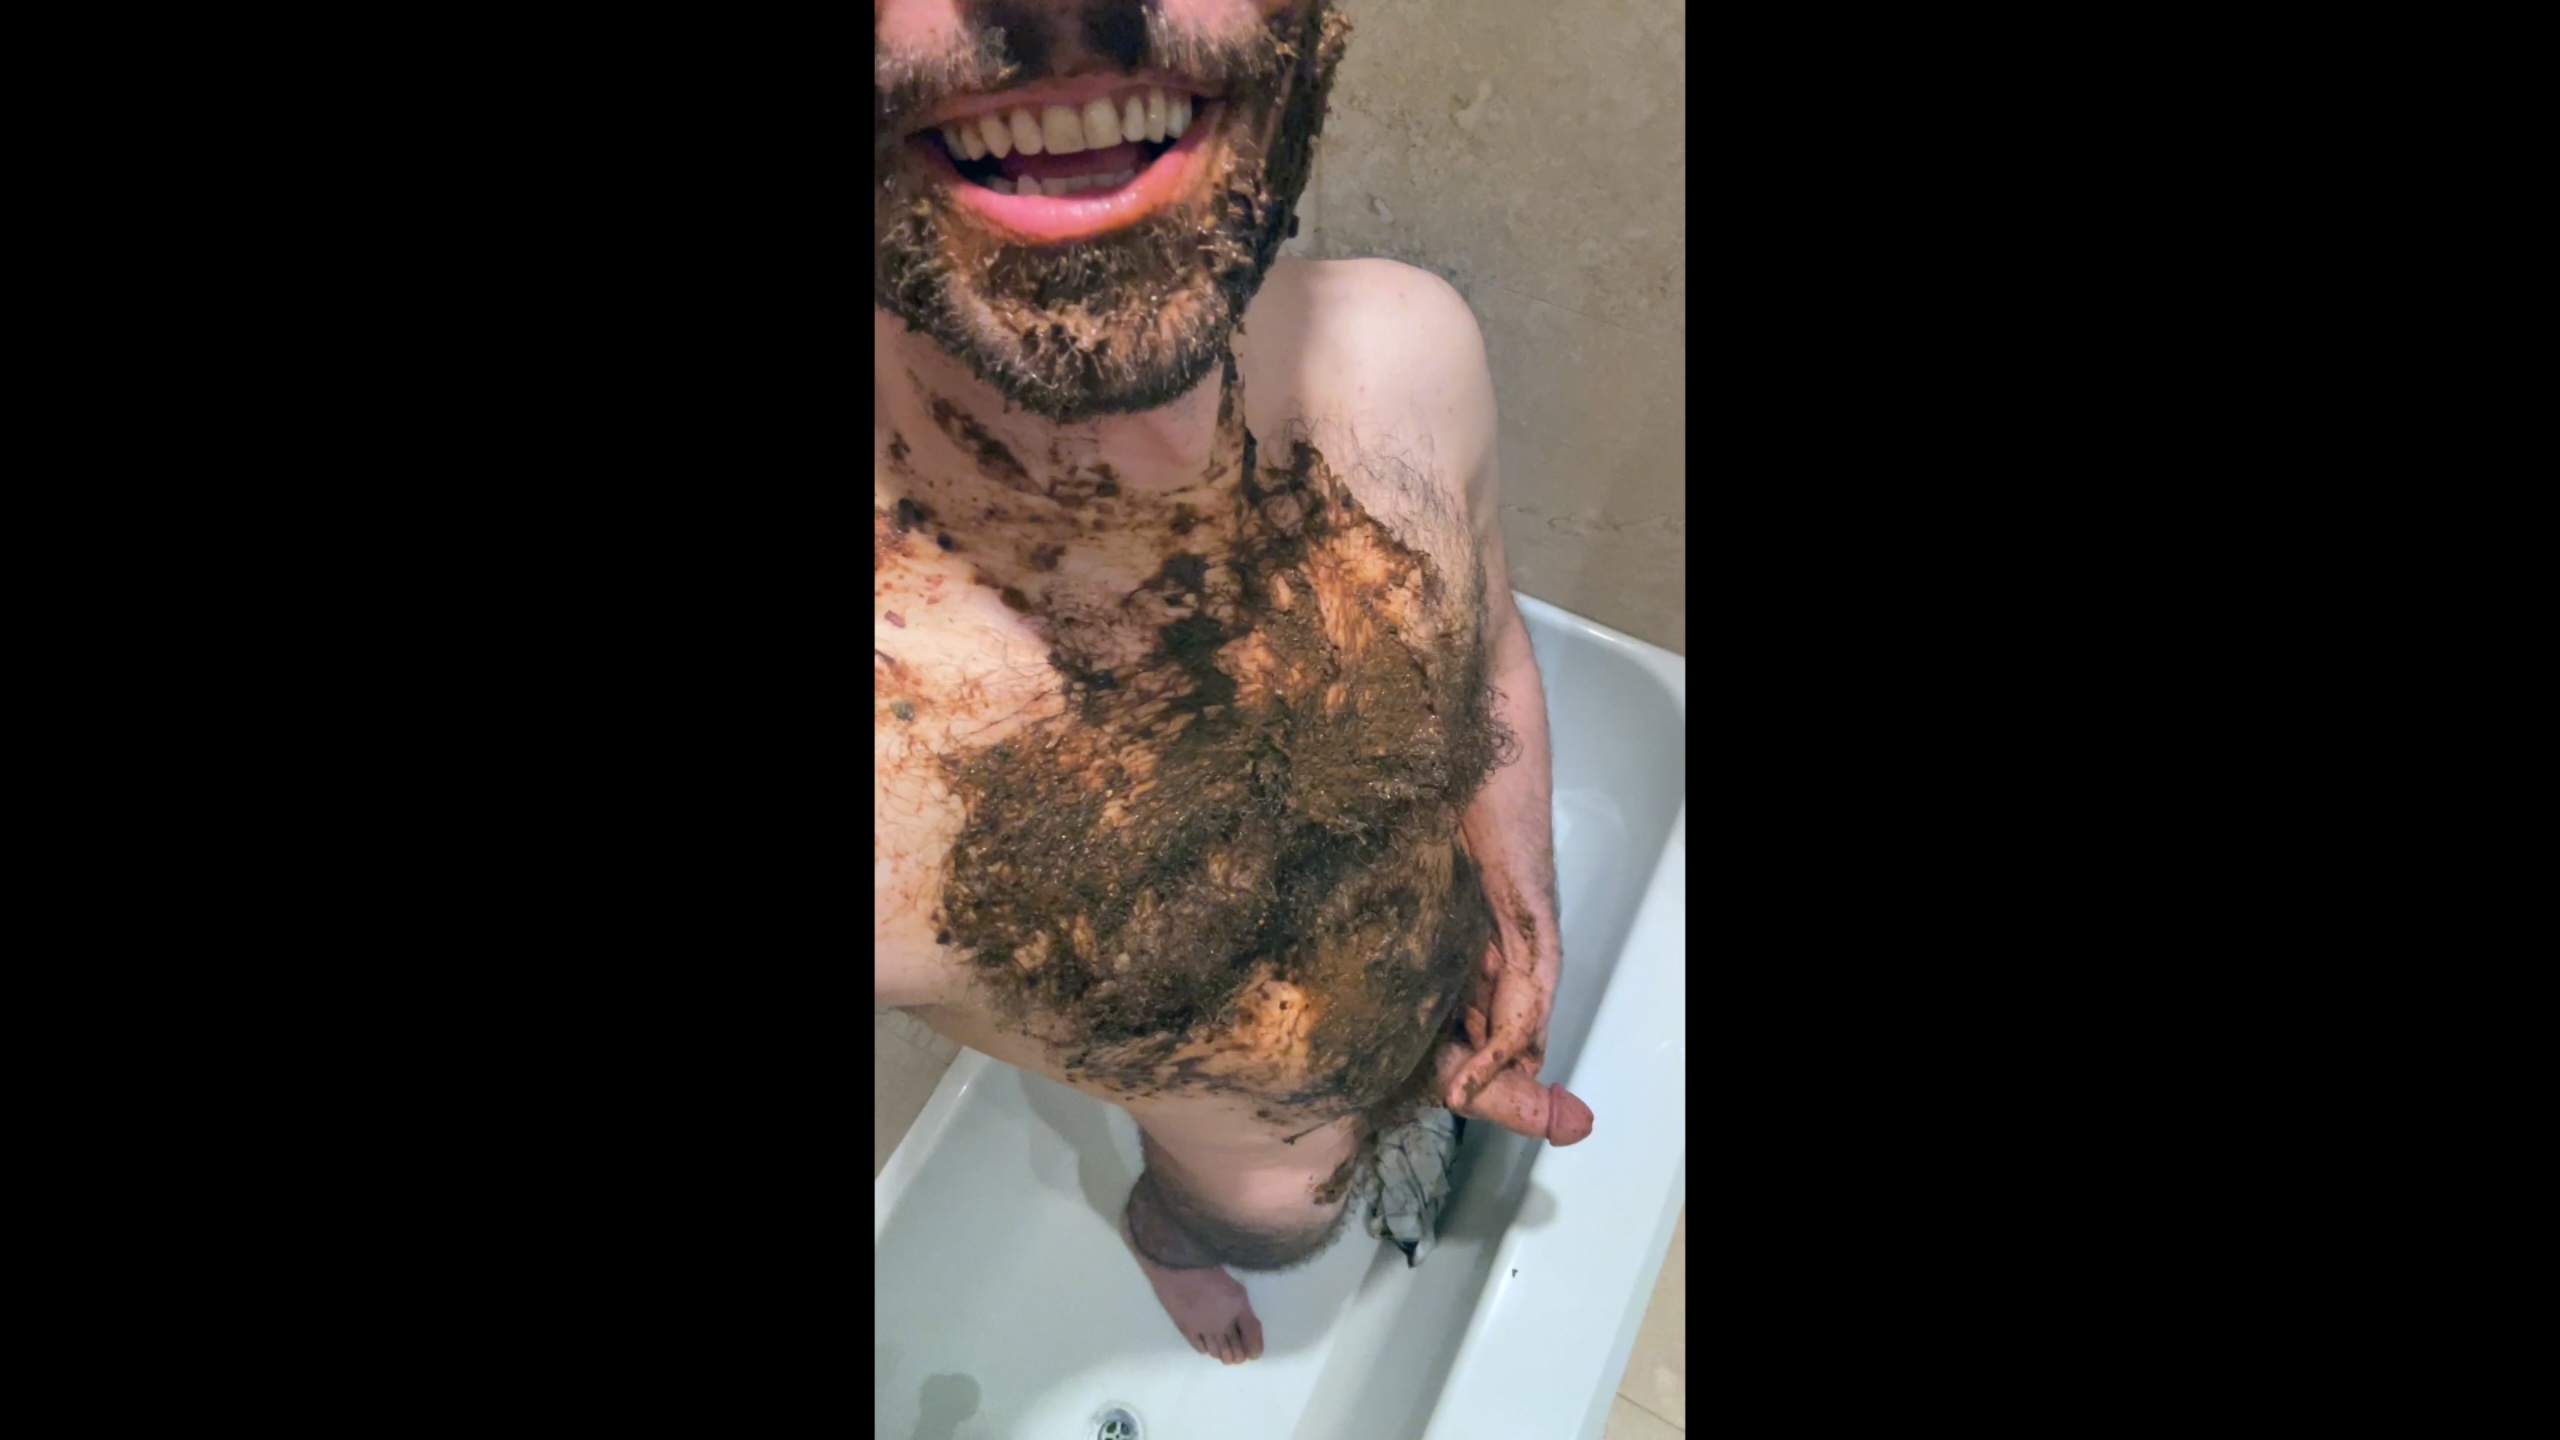 Stuffing my face, body, cock and cum with my shit!